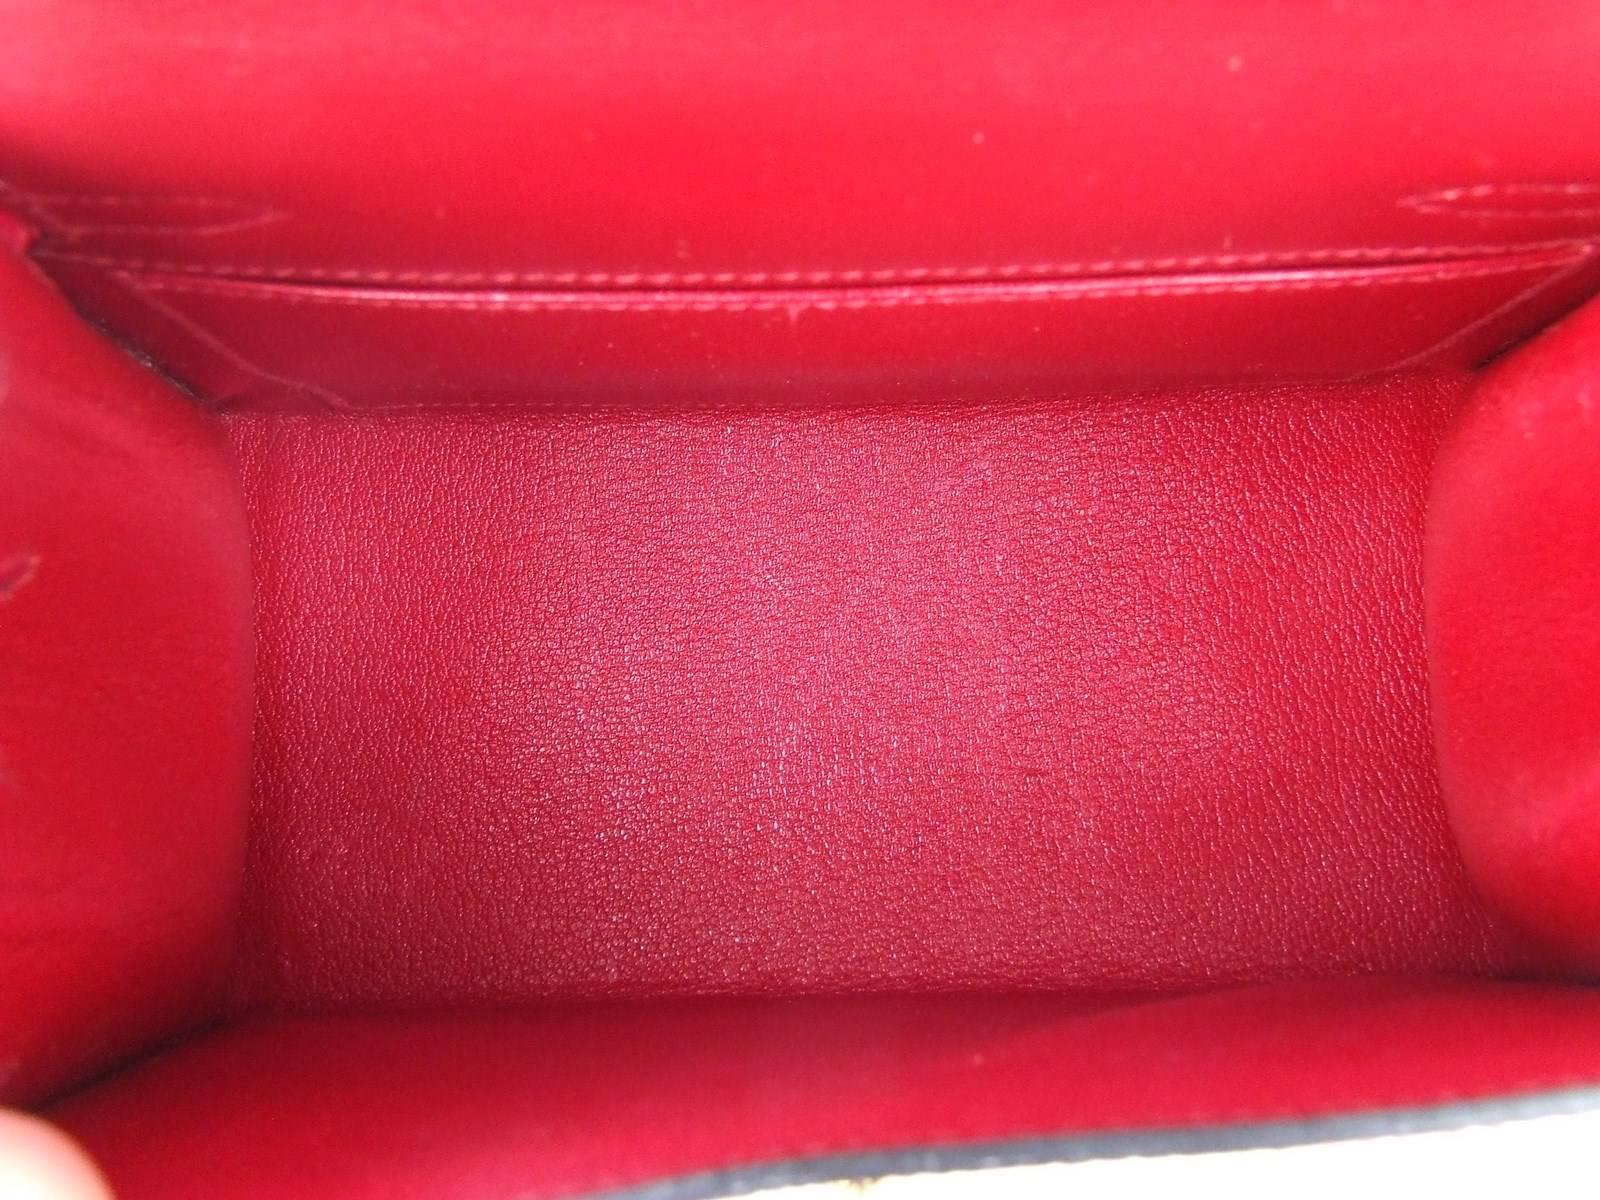 Exceptionnal and Rare Hermes Mini Kelly Bag 20 cm 2 ways Red Lizard Gold Hdw 3